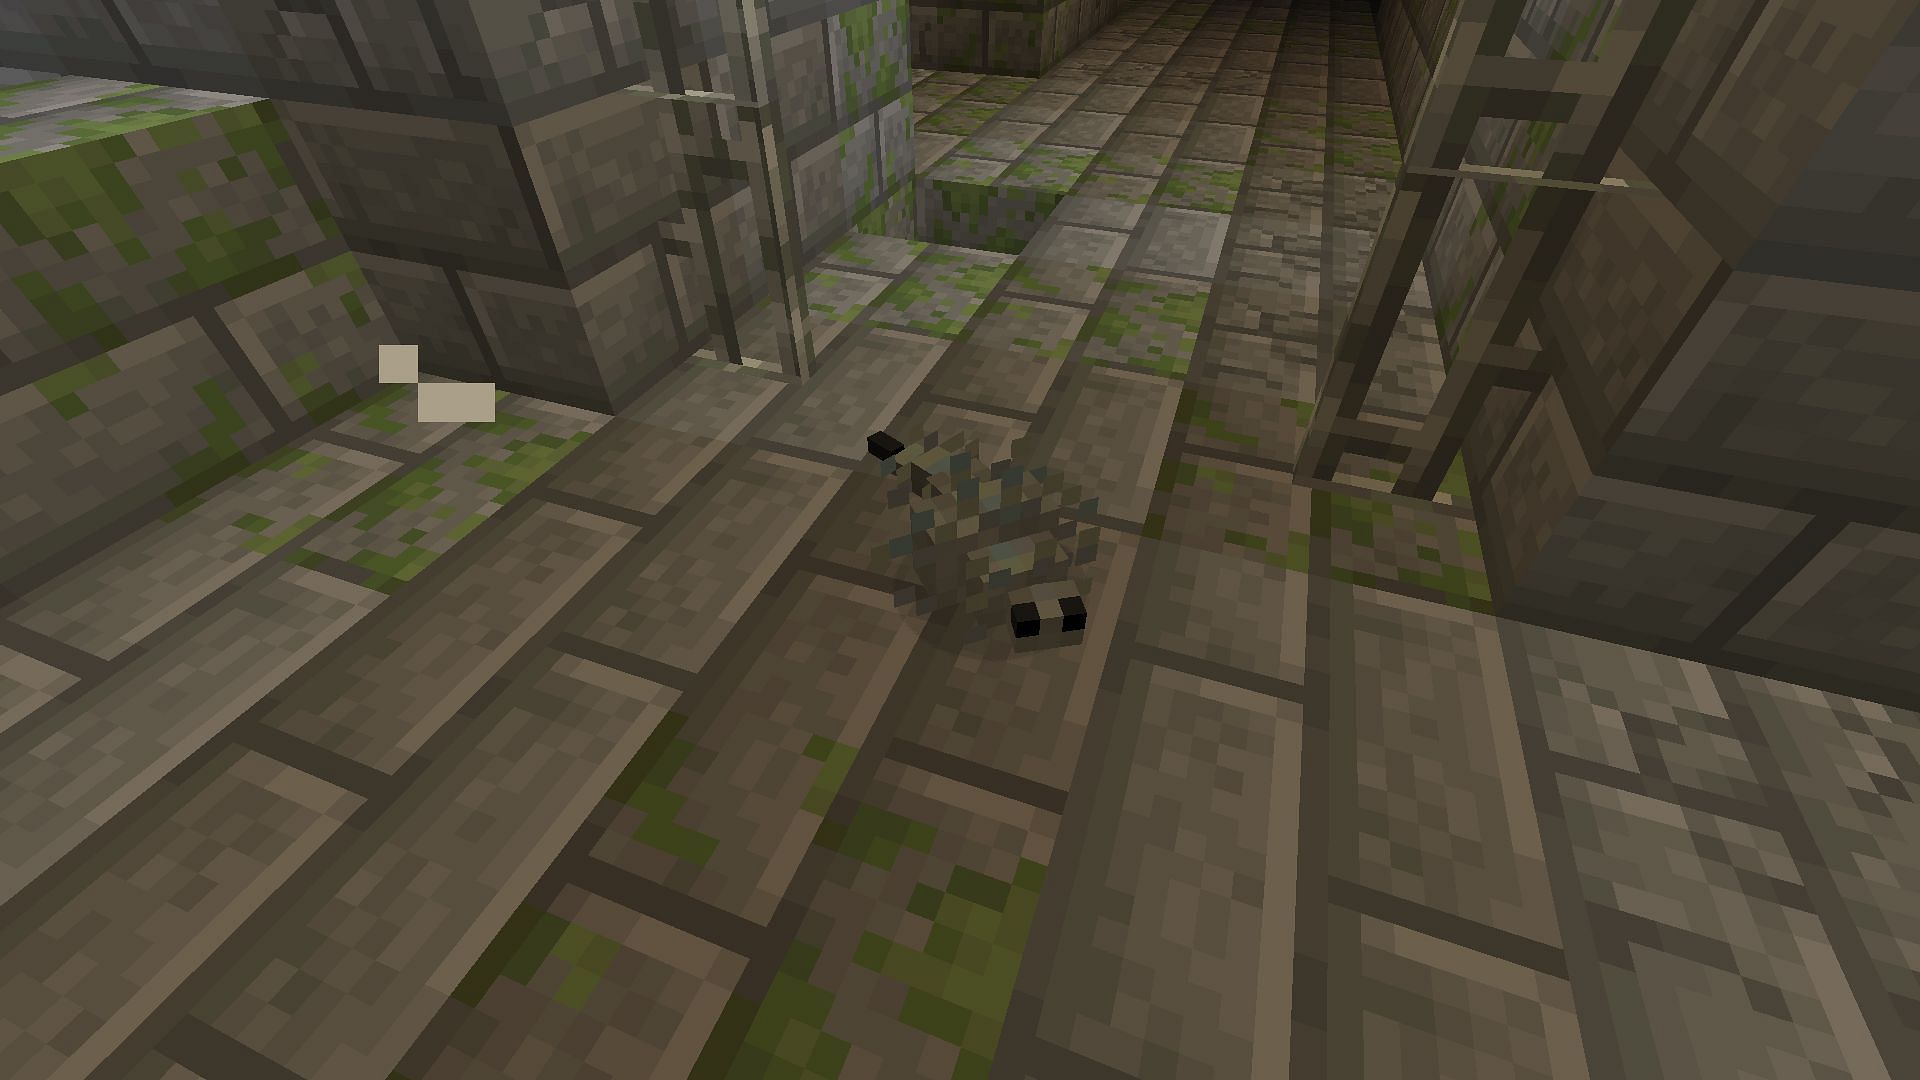 Randomly spawning silverfish during combat is sure to cause some chaos (Image via Mojang)